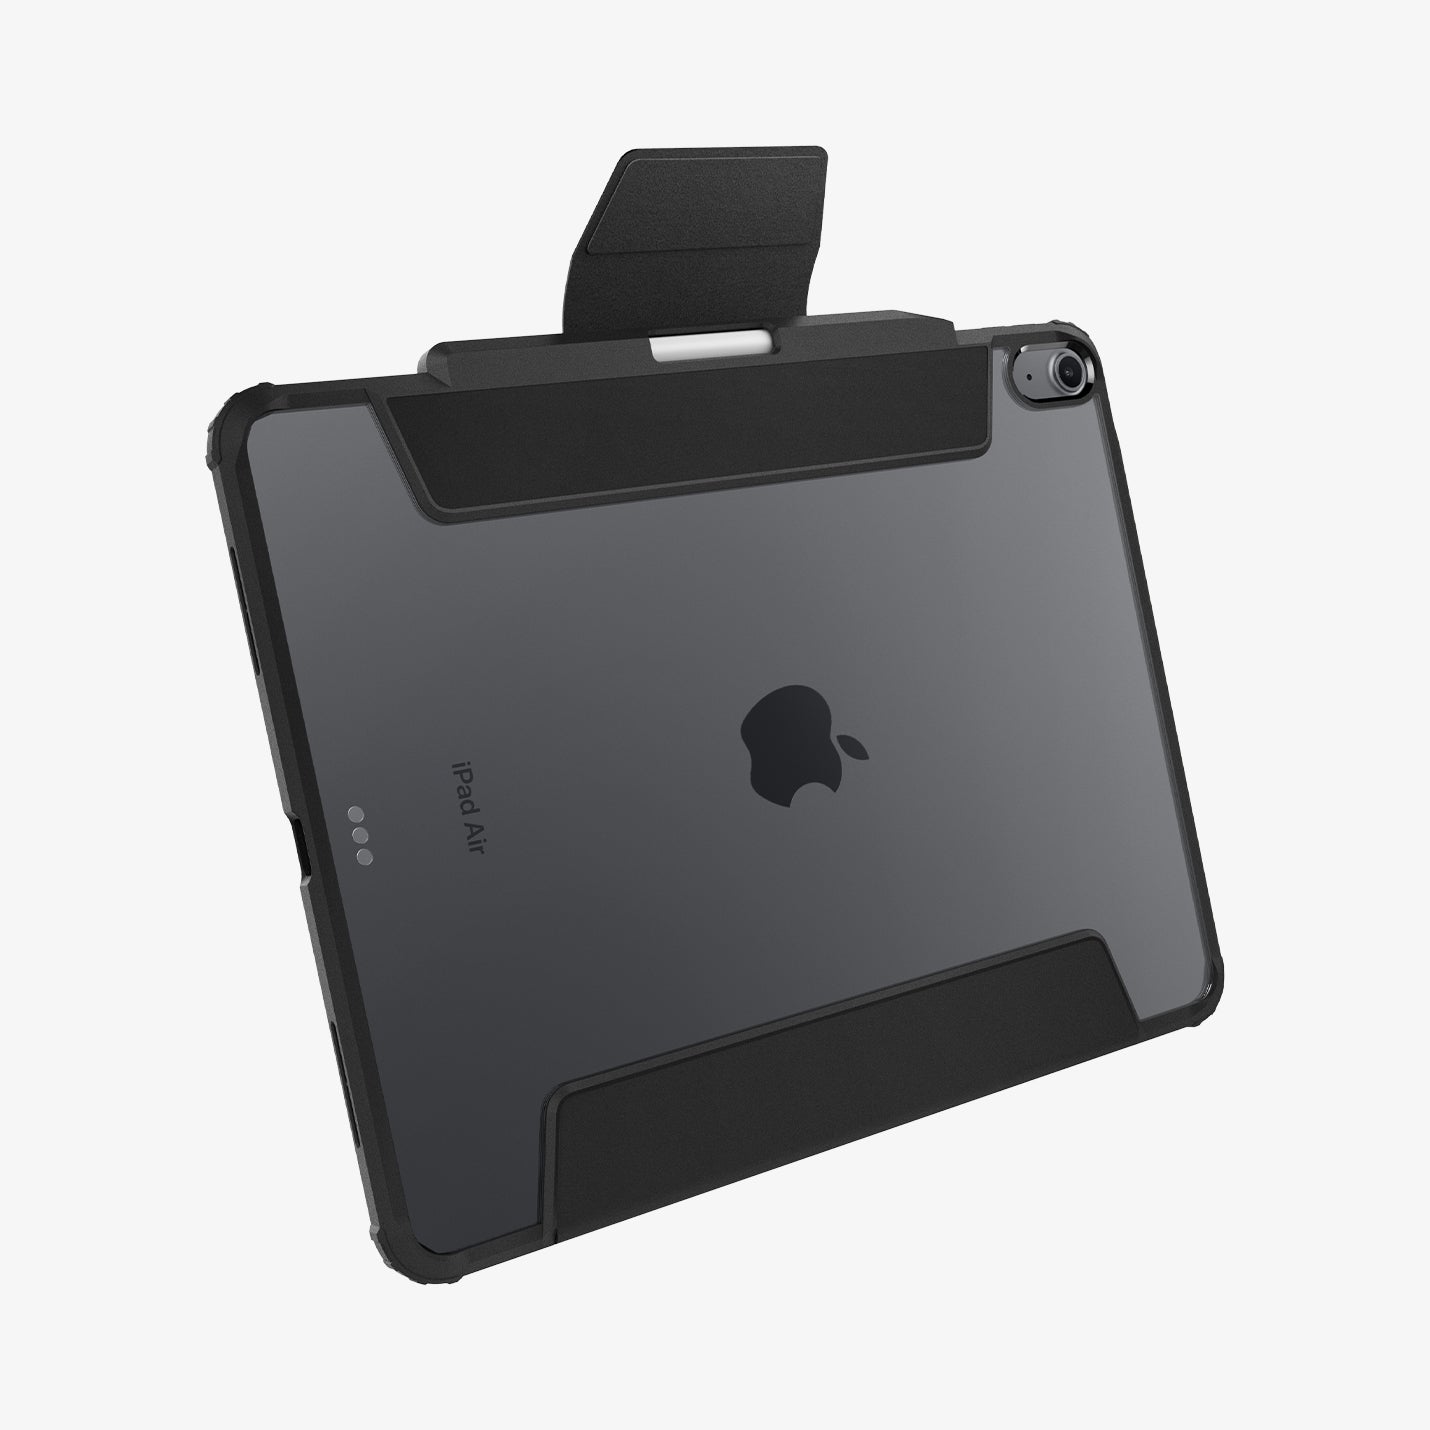 ACS07668 - iPad Air 12.9-inch Case Ultra Hybrid Pro in Black showing the back and bottom with cover flap open